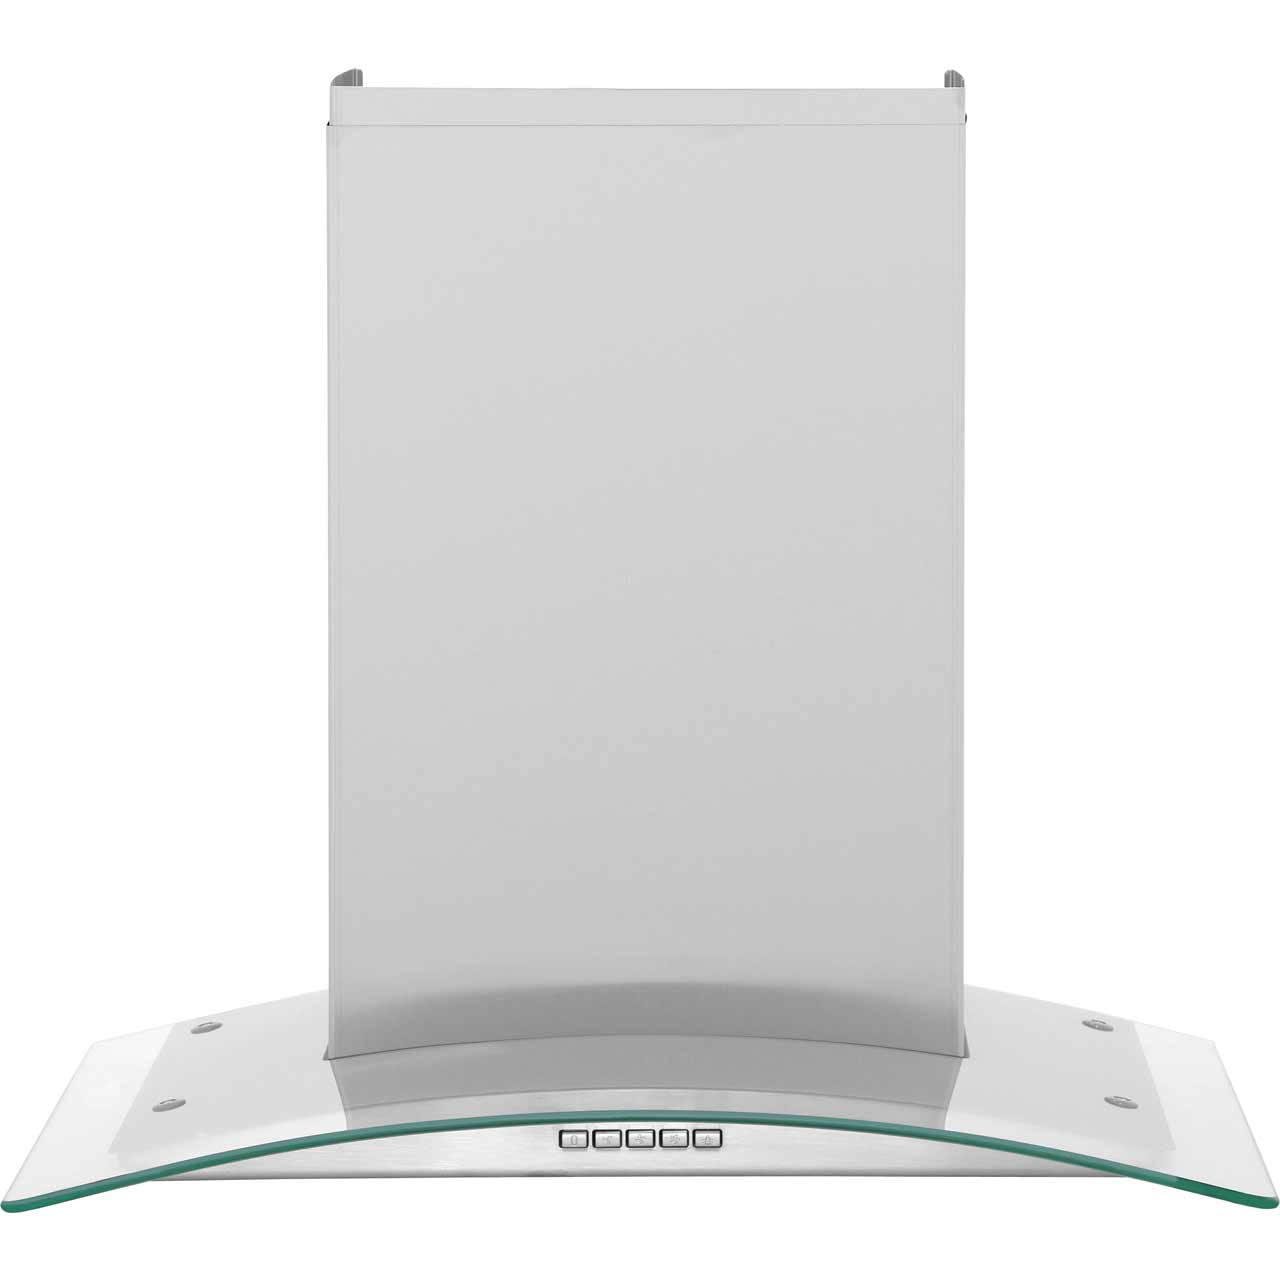 Stoves 600CGH 60 cm Chimney Cooker  Hood  Review 